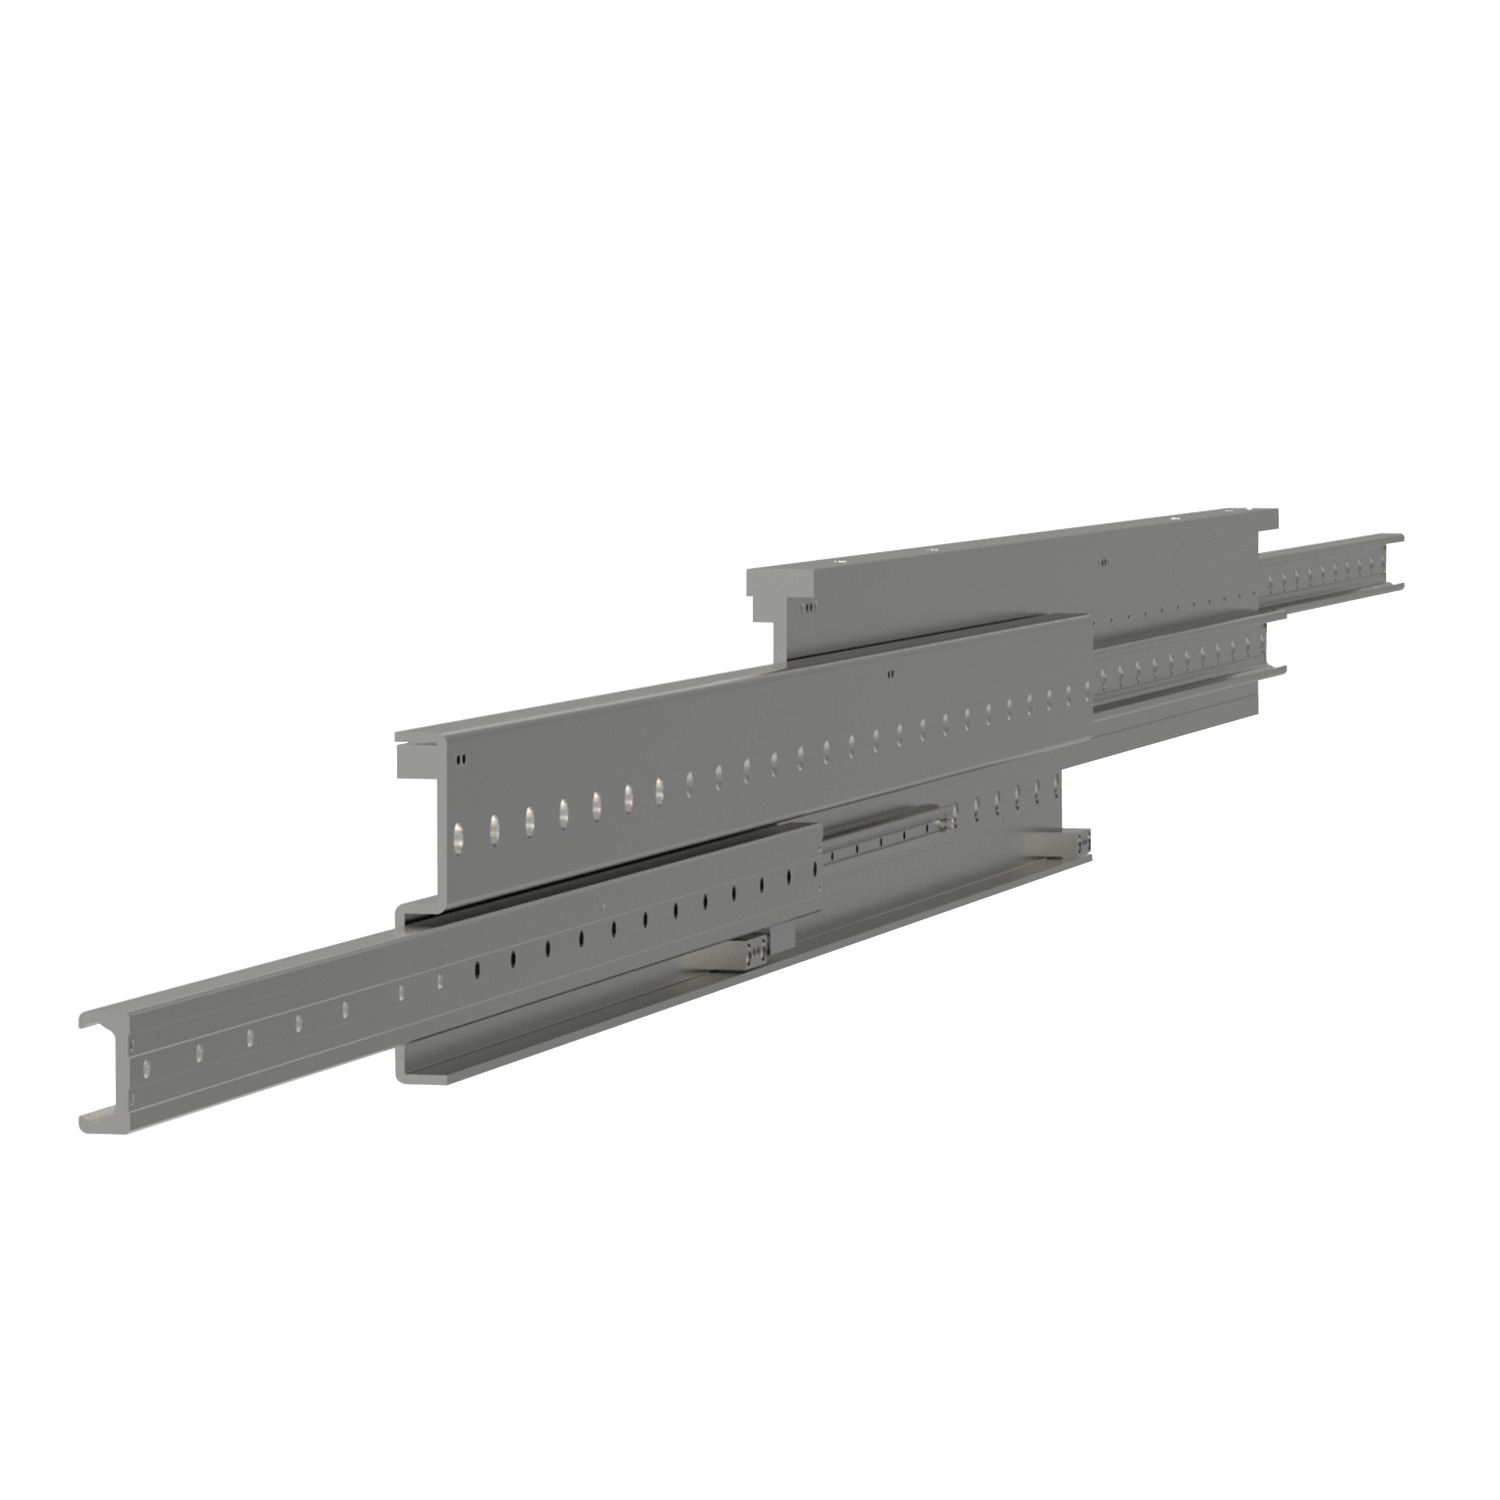 Extended Stroke Telescopic Slides These are extended stroke (150%), heavy duty telescopic rails.